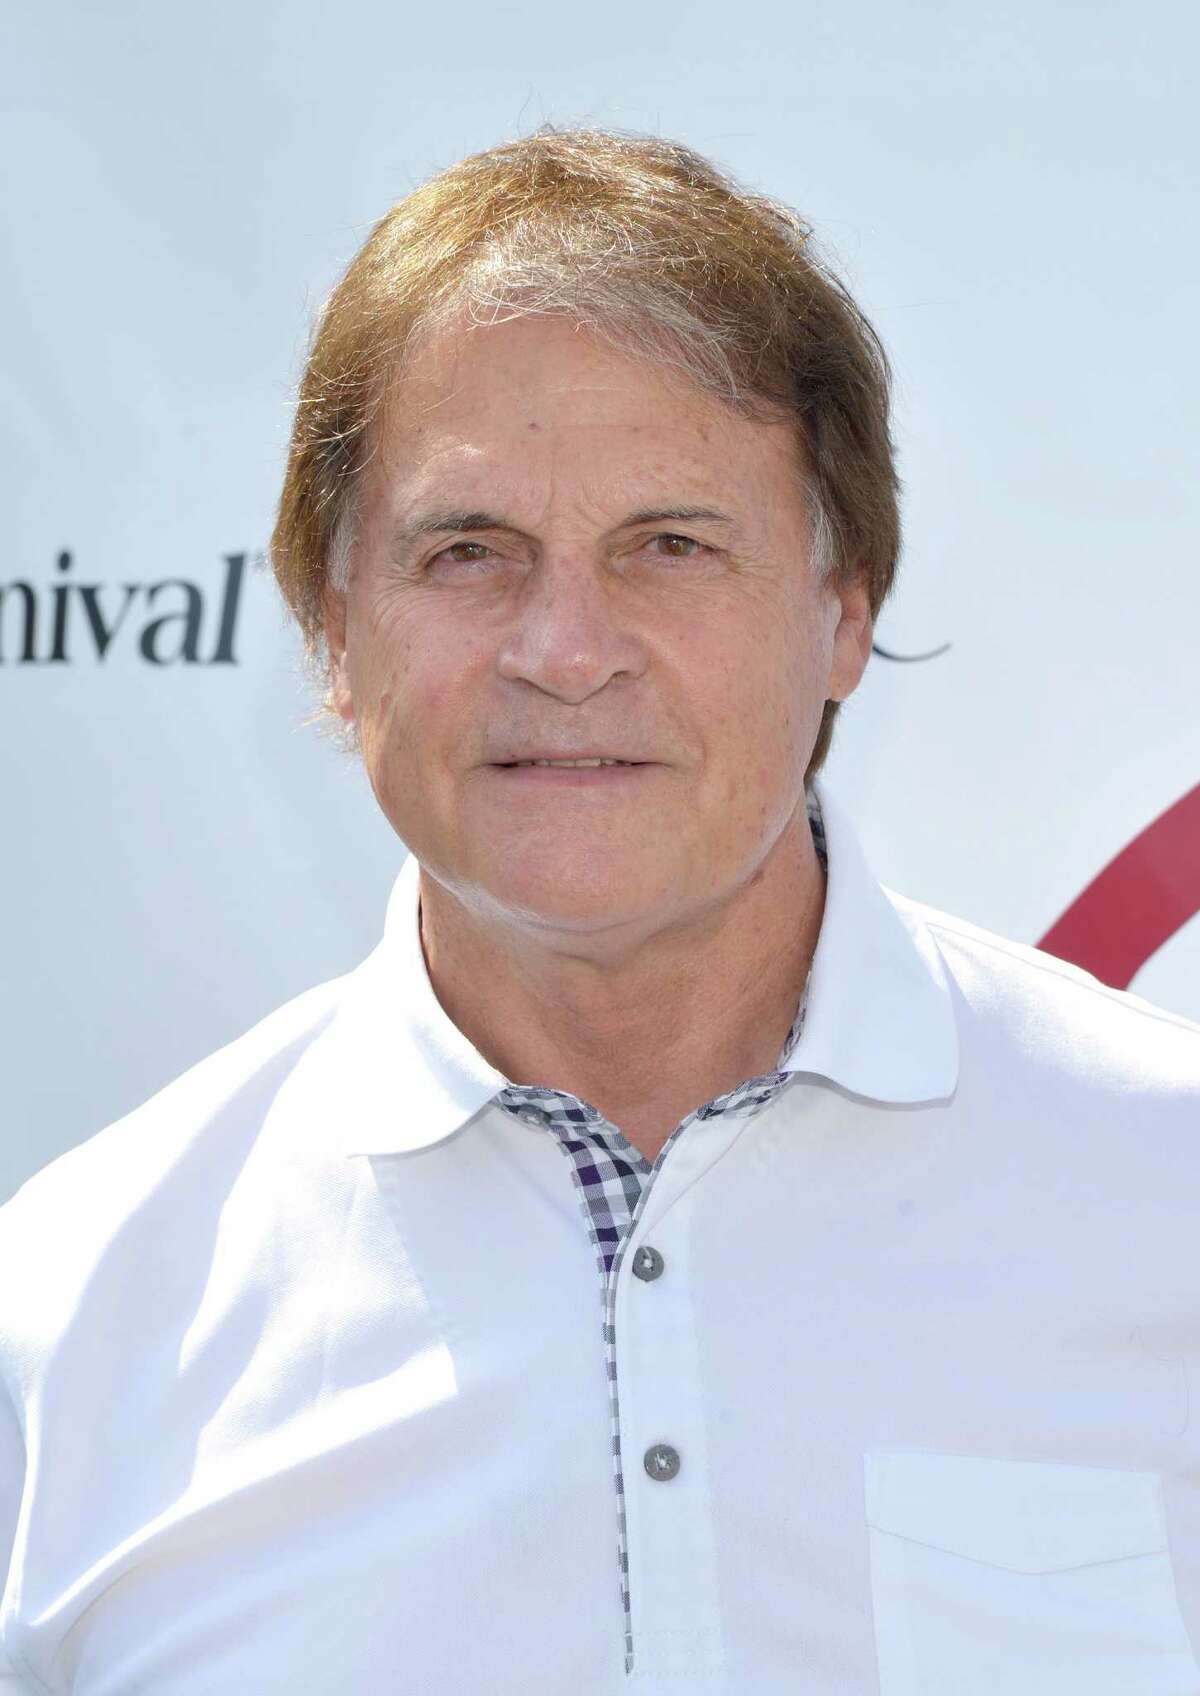 BURBANK, CA - MAY 05: Baseball manager Tony La Russa attends the 7th annual George Lopez Celebrity Golf Classic presented by Sabra Salsa at Lakeside Golf Club on May 5, 2014 in Burbank, California. (Photo by Michael Buckner/Getty Images for George Lopez)